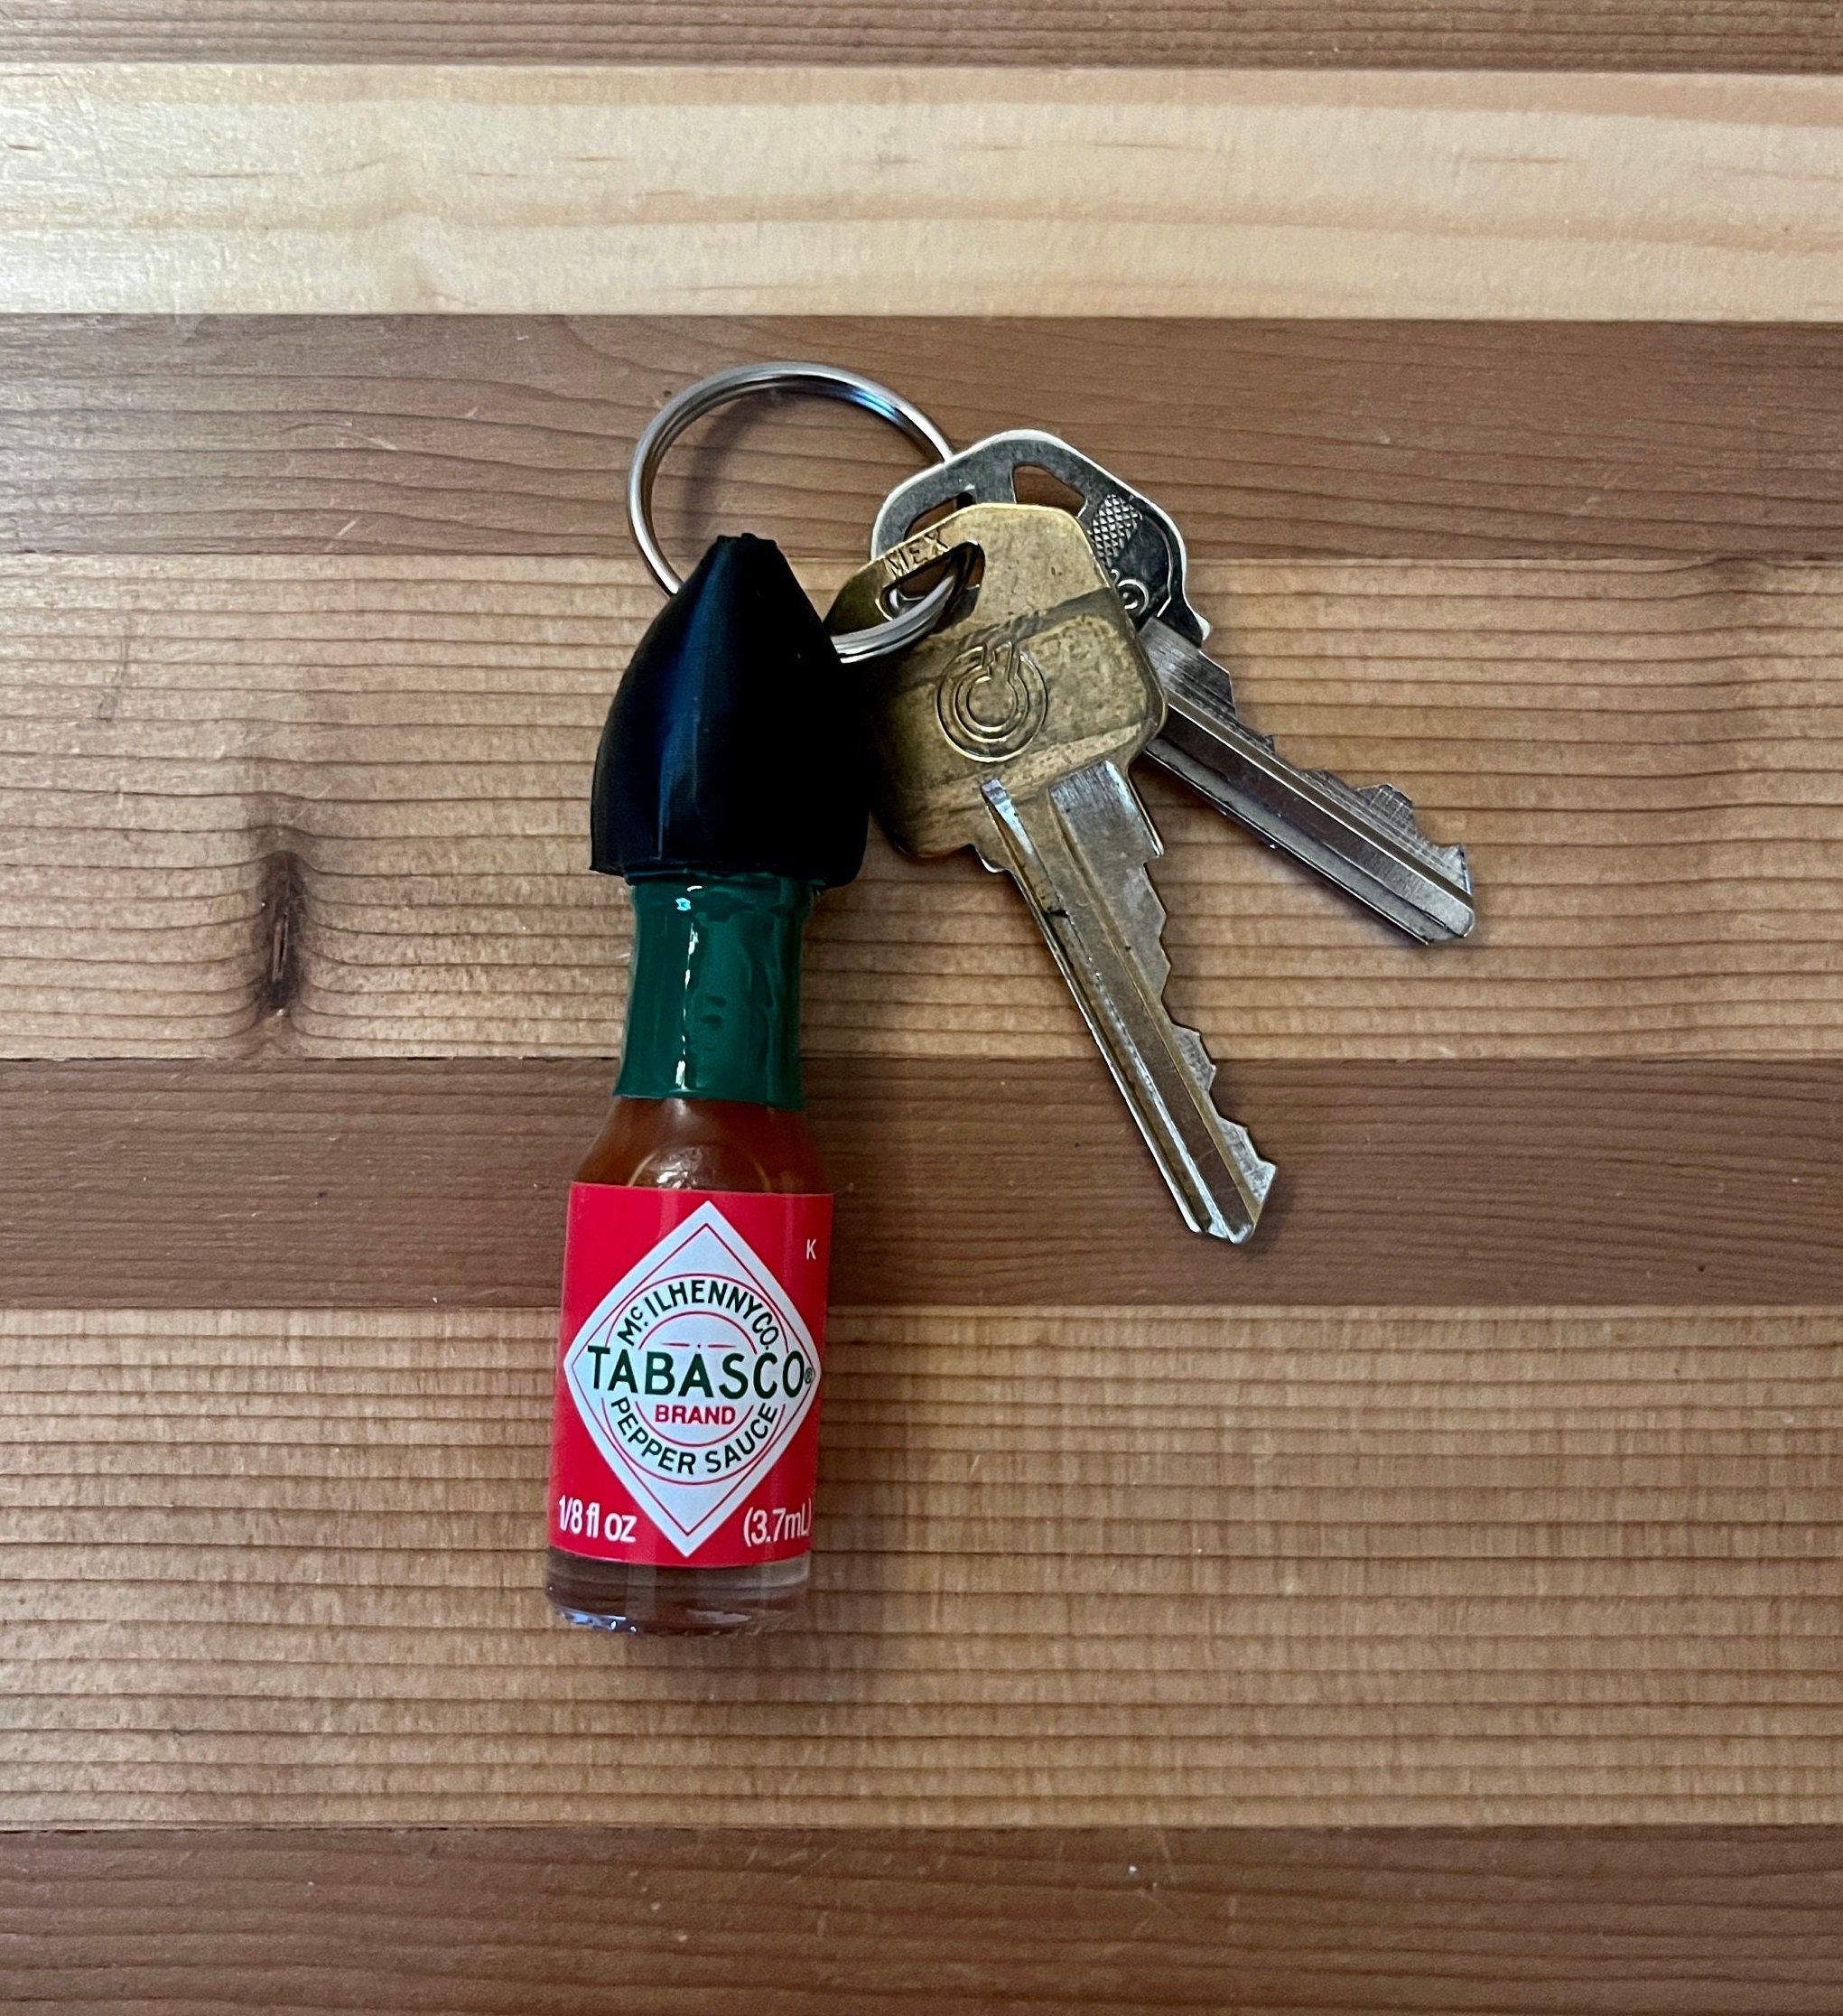 Porter Trail Genuine Leather Hot Sauce Keychain - Includes Mini Hot Sauce Bottle. Portable Hot Sauce for on The Go